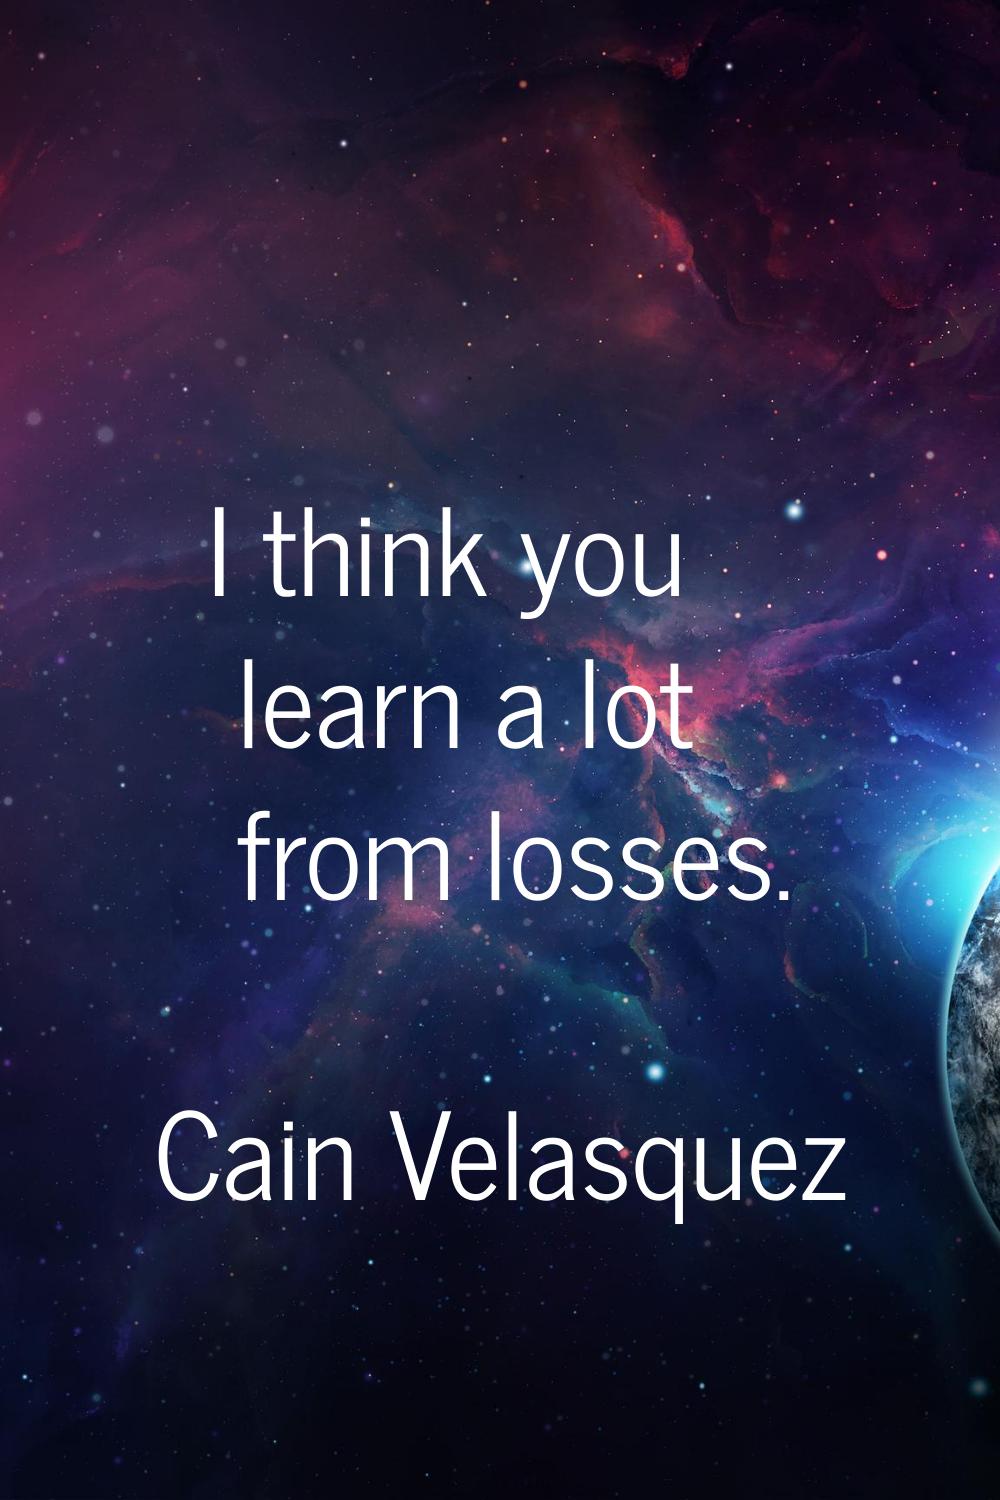 I think you learn a lot from losses.